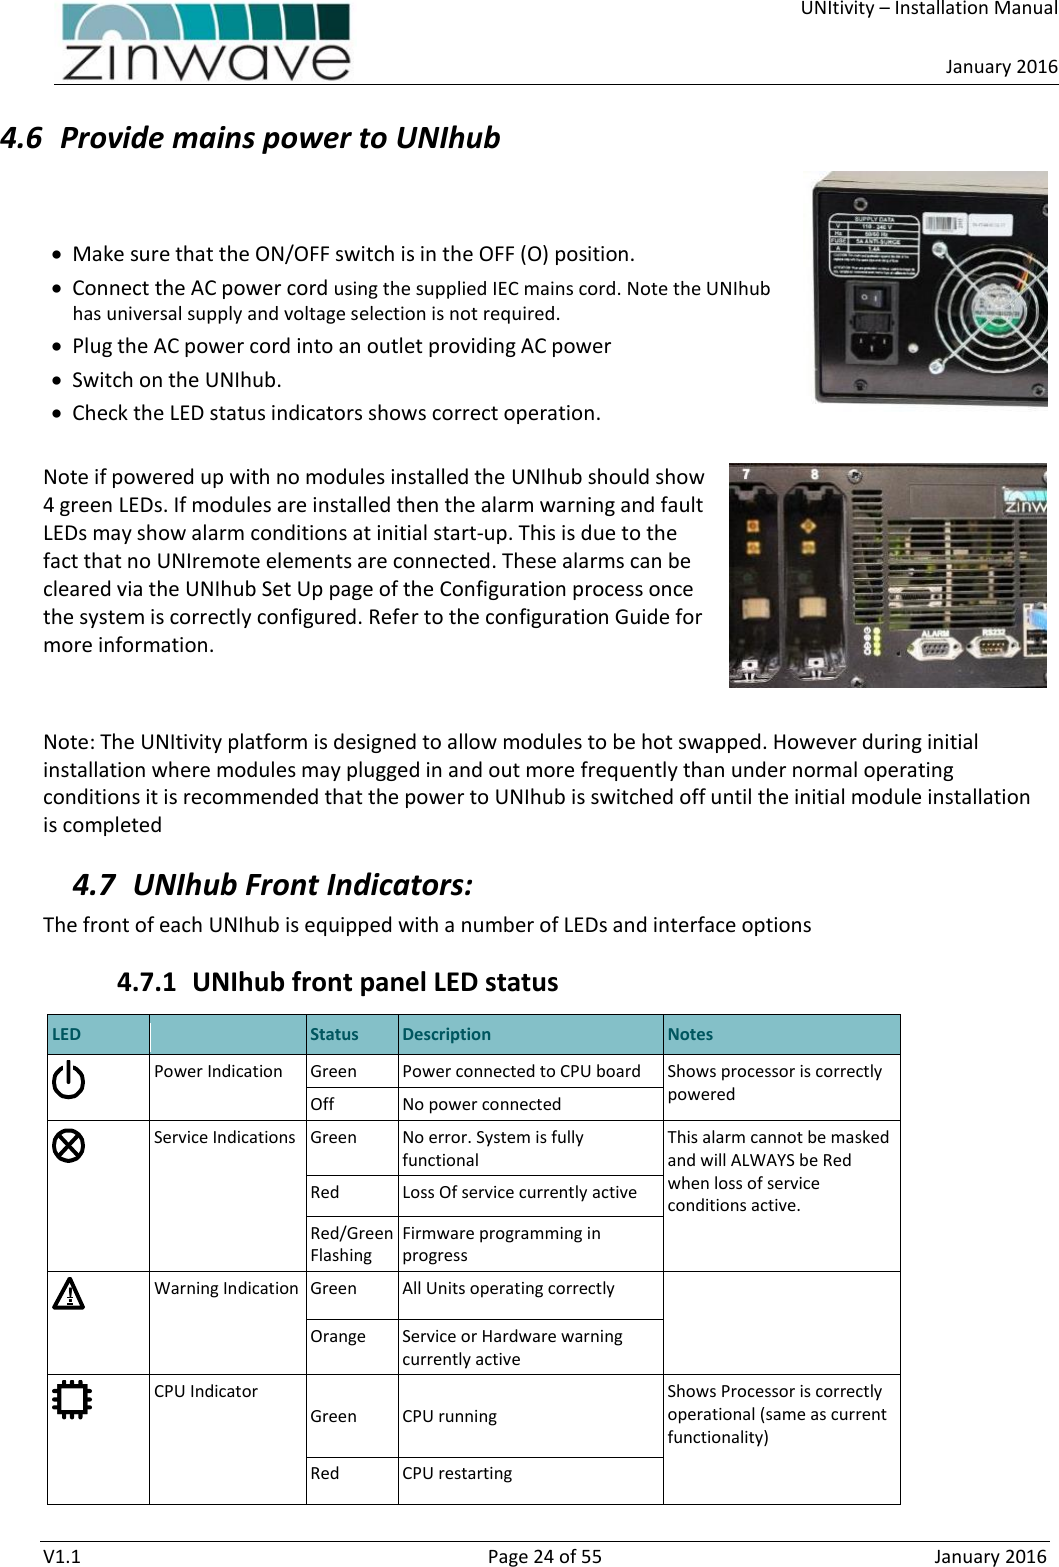     UNItivity – Installation Manual      January 2016  V1.1  Page 24 of 55  January 2016 4.6 Provide mains power to UNIhub     Make sure that the ON/OFF switch is in the OFF (O) position.   Connect the AC power cord using the supplied IEC mains cord. Note the UNIhub has universal supply and voltage selection is not required.  Plug the AC power cord into an outlet providing AC power   Switch on the UNIhub.  Check the LED status indicators shows correct operation.  Note if powered up with no modules installed the UNIhub should show 4 green LEDs. If modules are installed then the alarm warning and fault LEDs may show alarm conditions at initial start-up. This is due to the fact that no UNIremote elements are connected. These alarms can be cleared via the UNIhub Set Up page of the Configuration process once the system is correctly configured. Refer to the configuration Guide for more information.   Note: The UNItivity platform is designed to allow modules to be hot swapped. However during initial installation where modules may plugged in and out more frequently than under normal operating conditions it is recommended that the power to UNIhub is switched off until the initial module installation is completed 4.7 UNIhub Front Indicators: The front of each UNIhub is equipped with a number of LEDs and interface options 4.7.1 UNIhub front panel LED status  LED  Status Description Notes  Power Indication Green Power connected to CPU board Shows processor is correctly powered Off No power connected  Service Indications Green No error. System is fully functional This alarm cannot be masked and will ALWAYS be Red when loss of service conditions active. Red Loss Of service currently active Red/Green Flashing Firmware programming in progress  Warning Indication Green All Units operating correctly  Orange Service or Hardware warning currently active  CPU Indicator  Green   CPU running  Shows Processor is correctly operational (same as current functionality)  Red CPU restarting  !